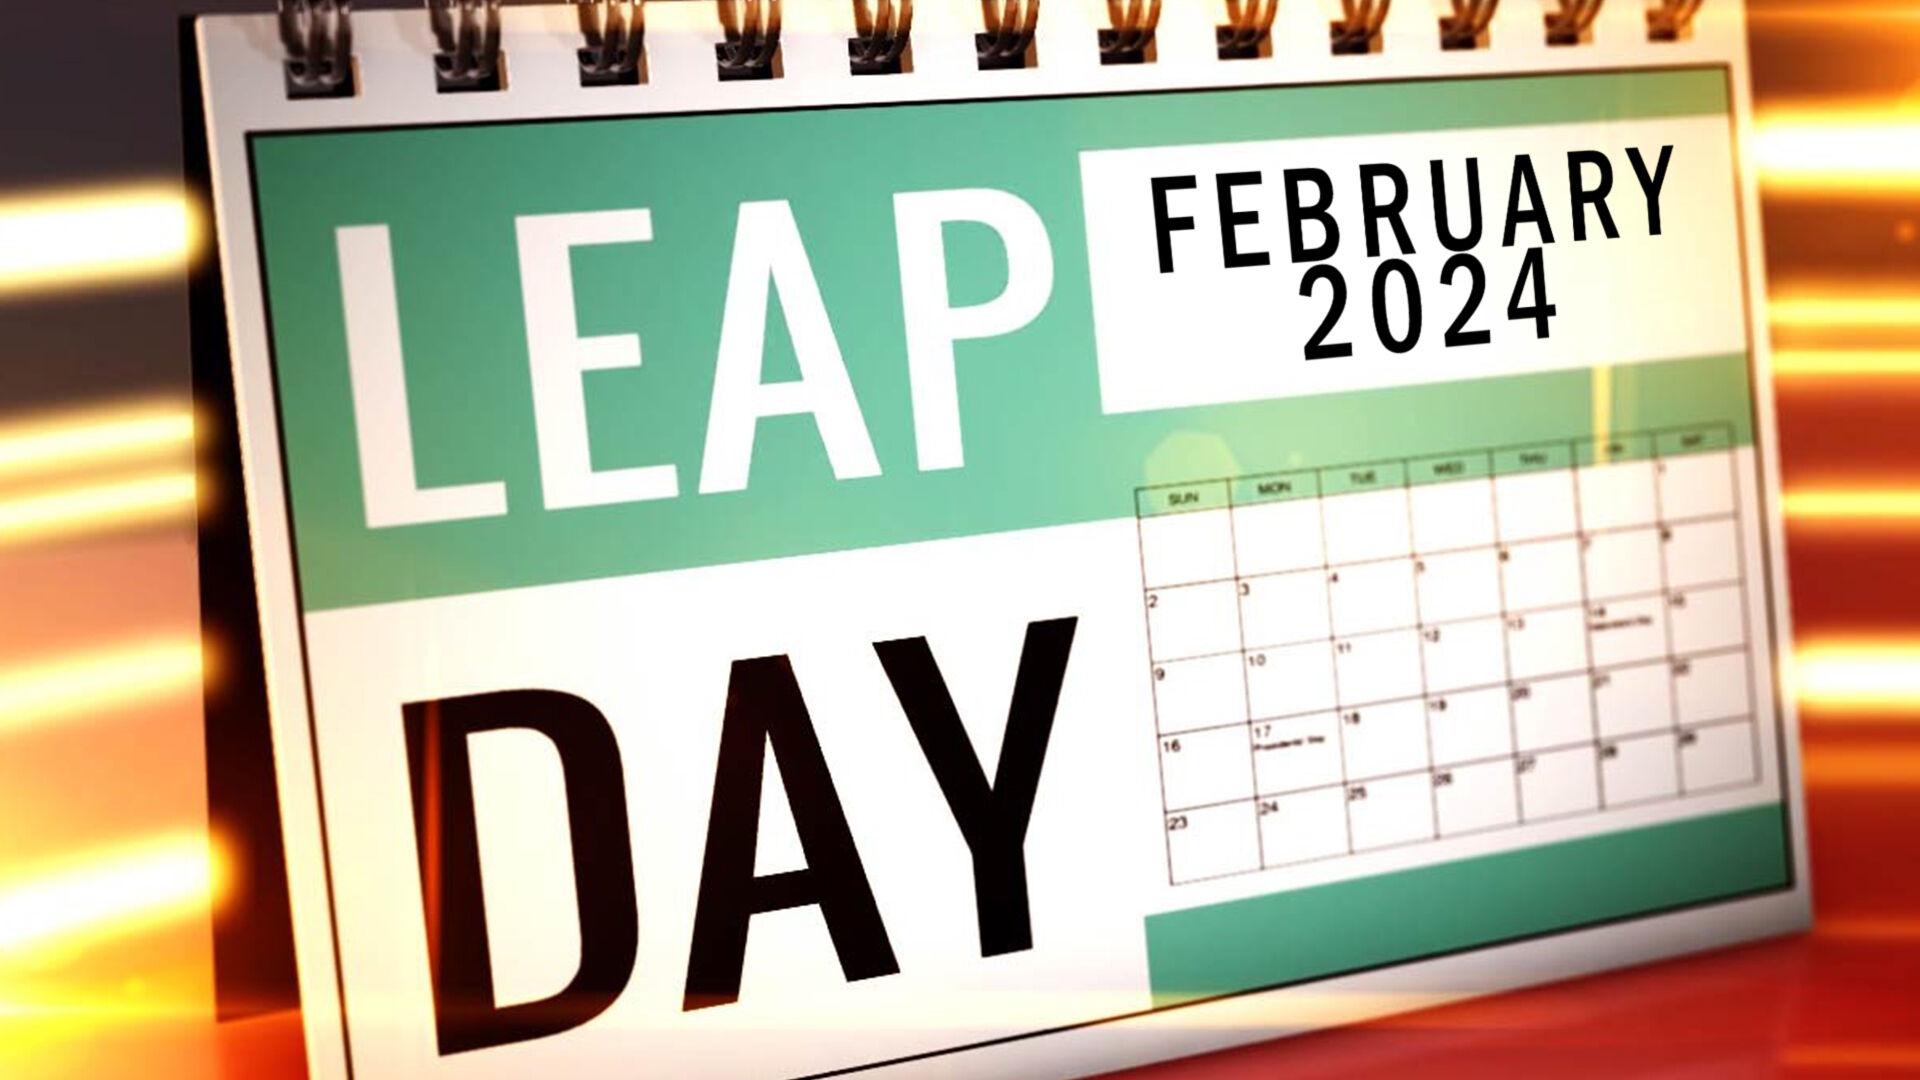 The importance of Leap Day